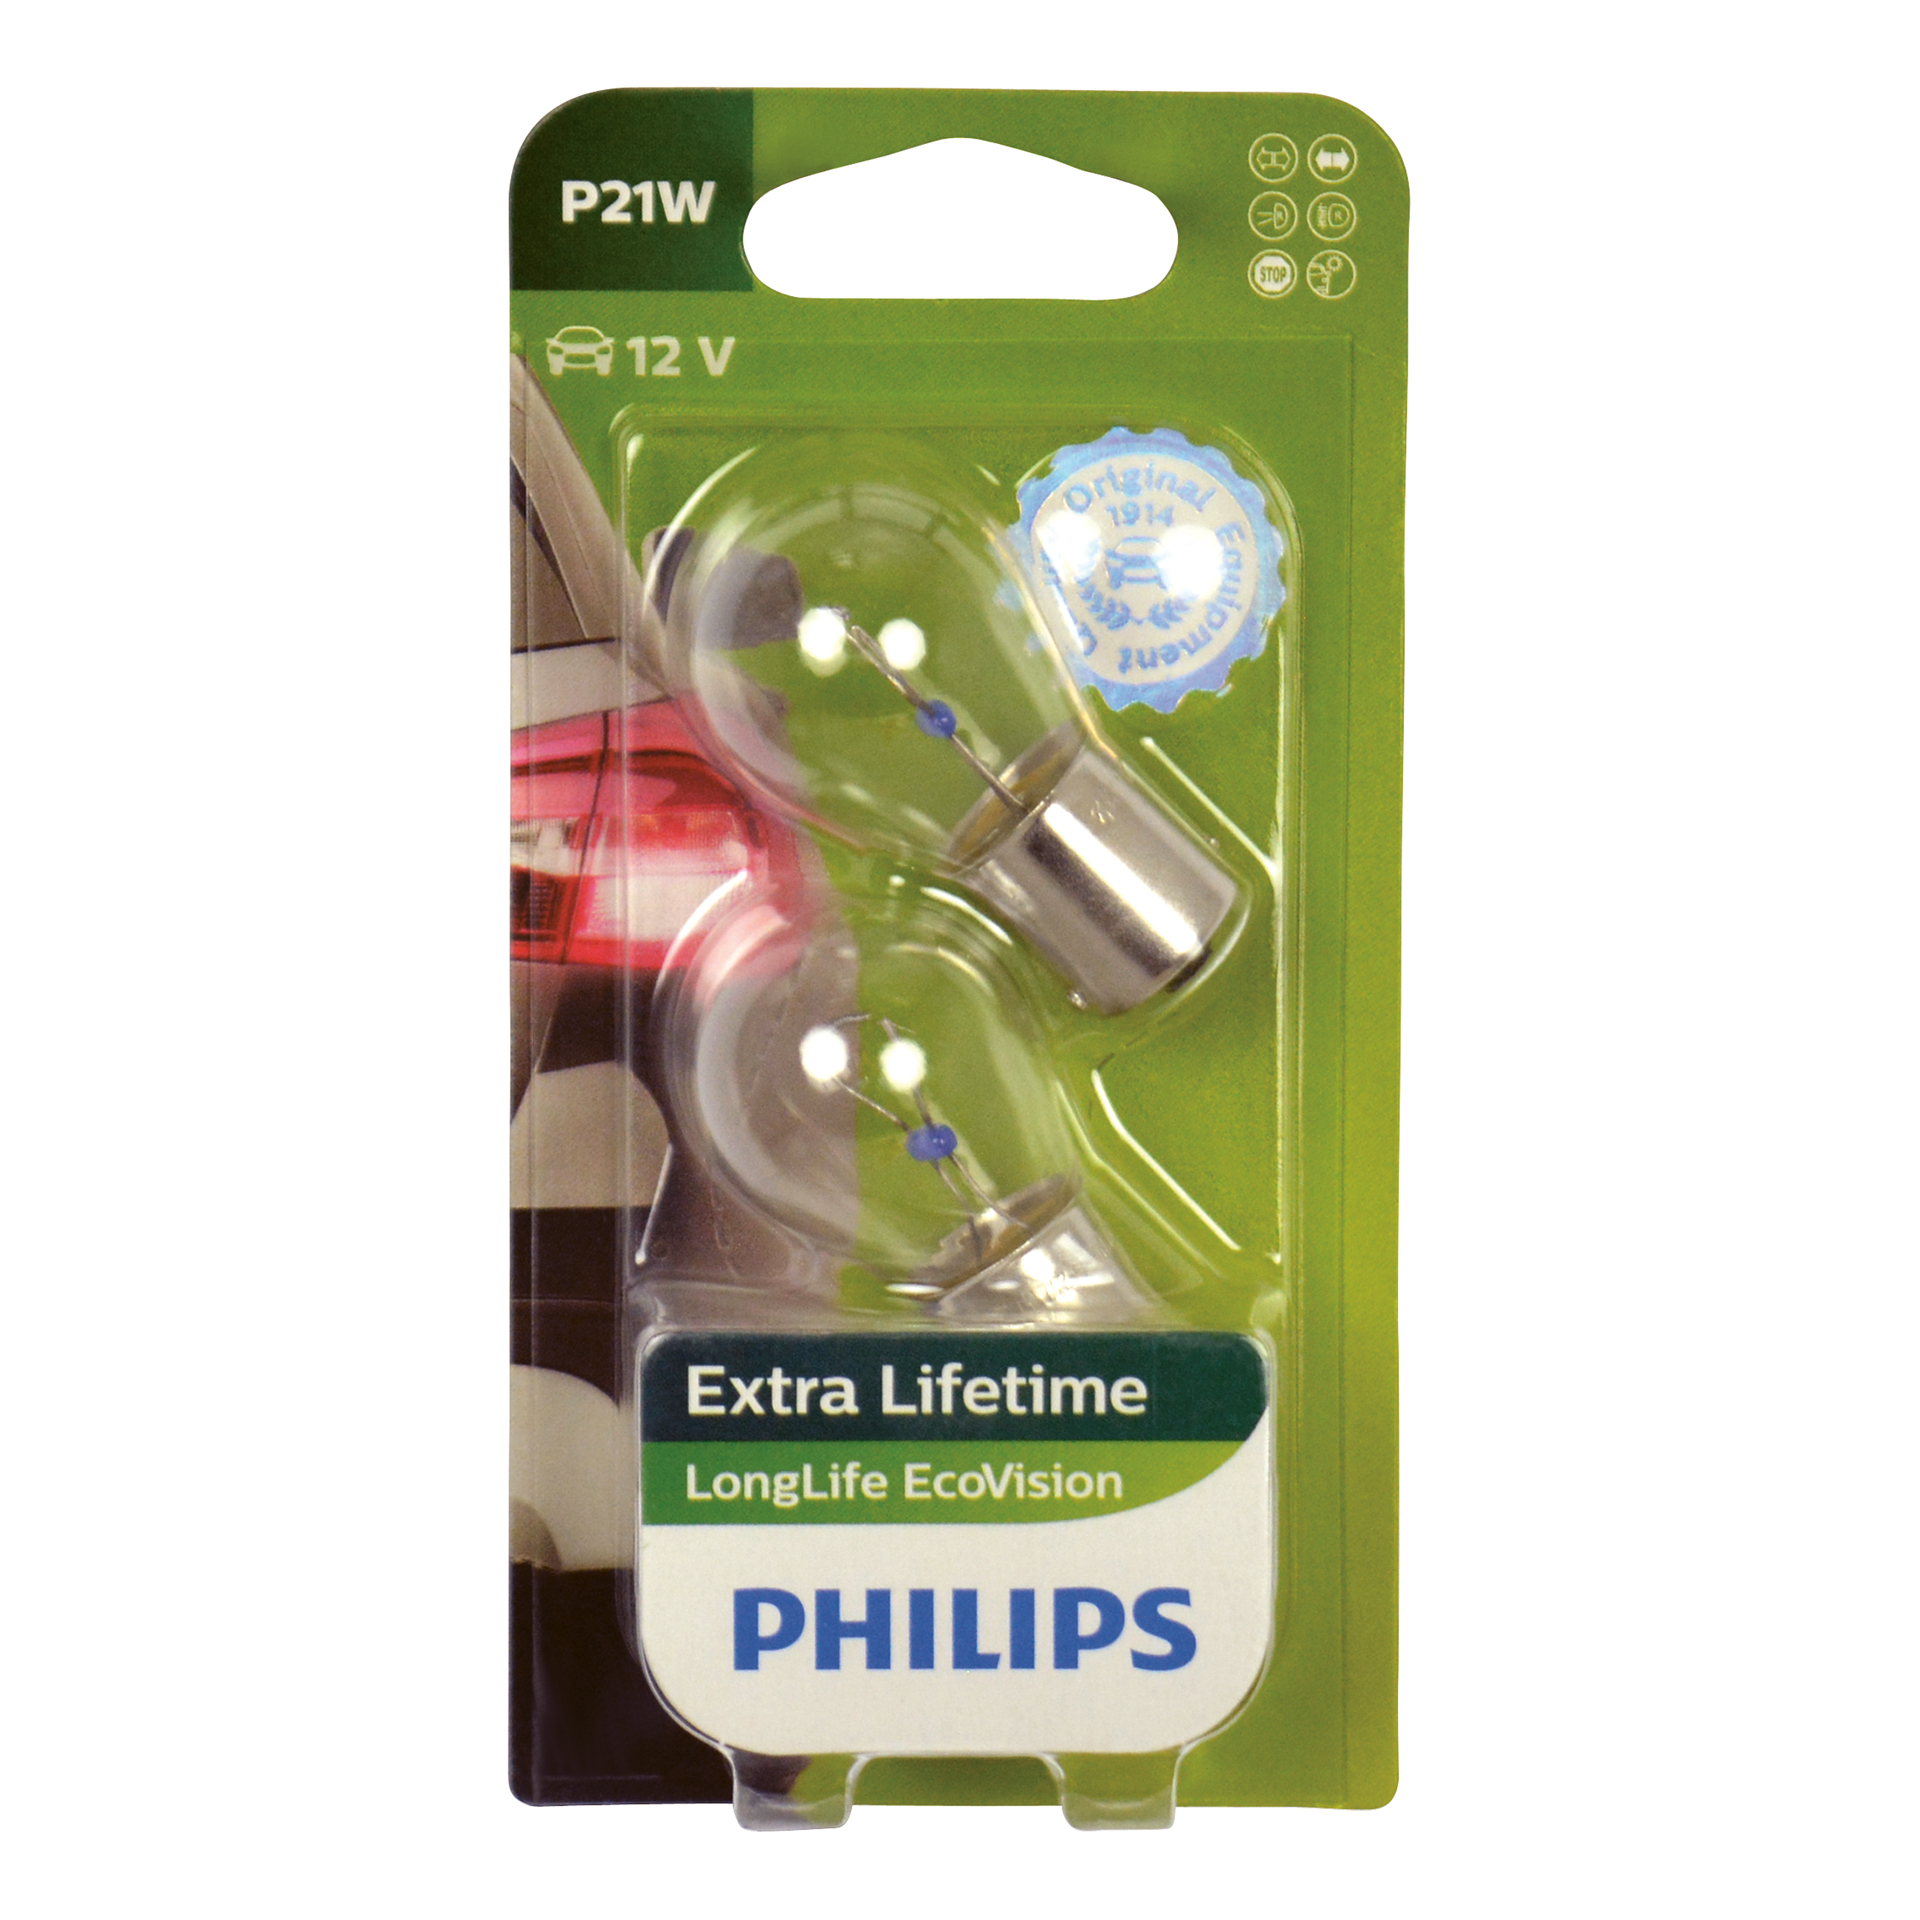 Philips Philips 12498LLECOB2 P21W EcoVision 5W blister 0730521